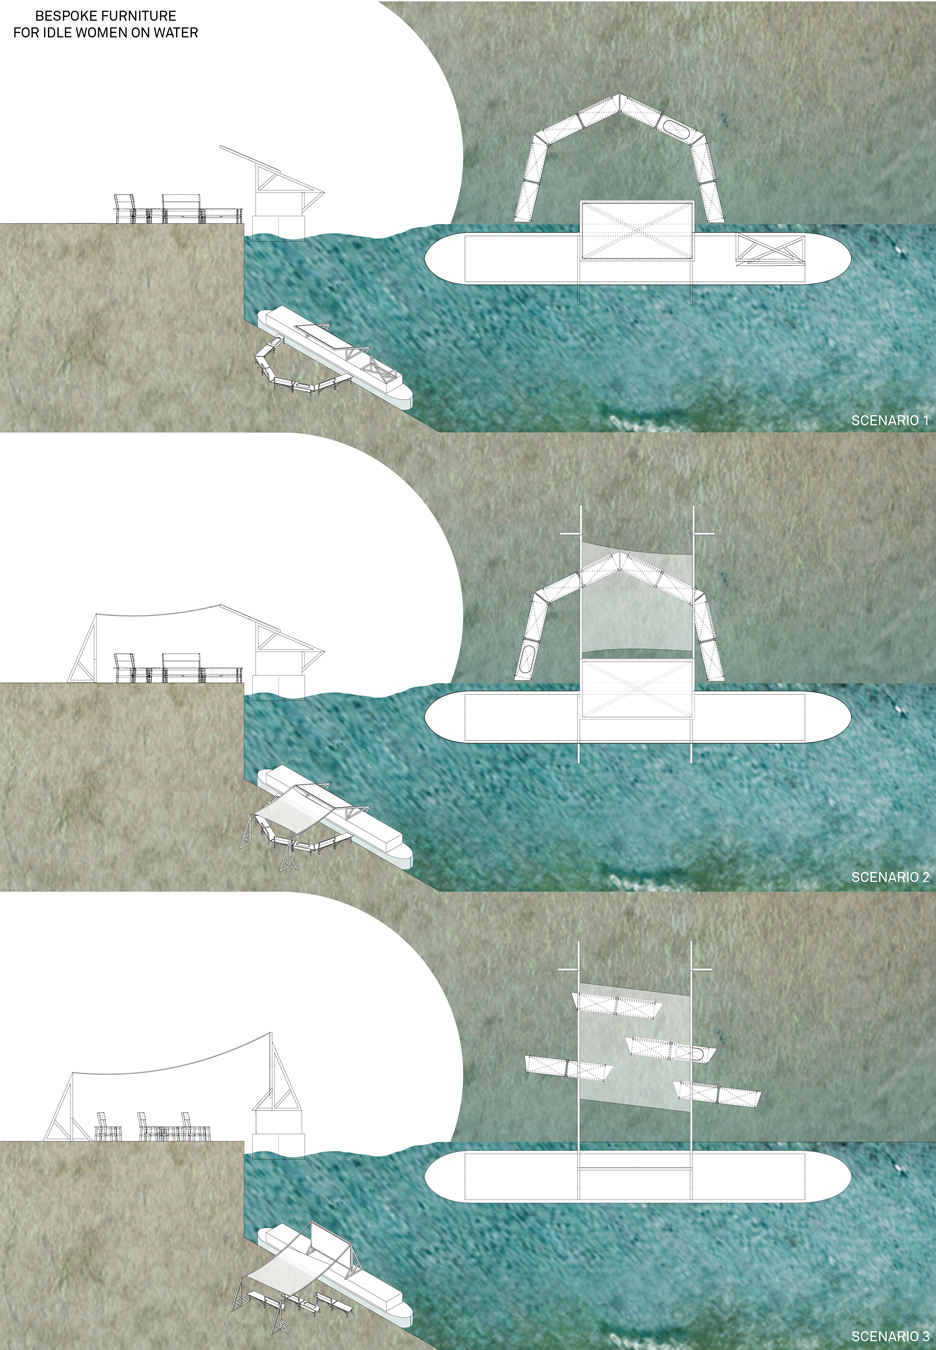 Floating arts centre for Idle women by Muf